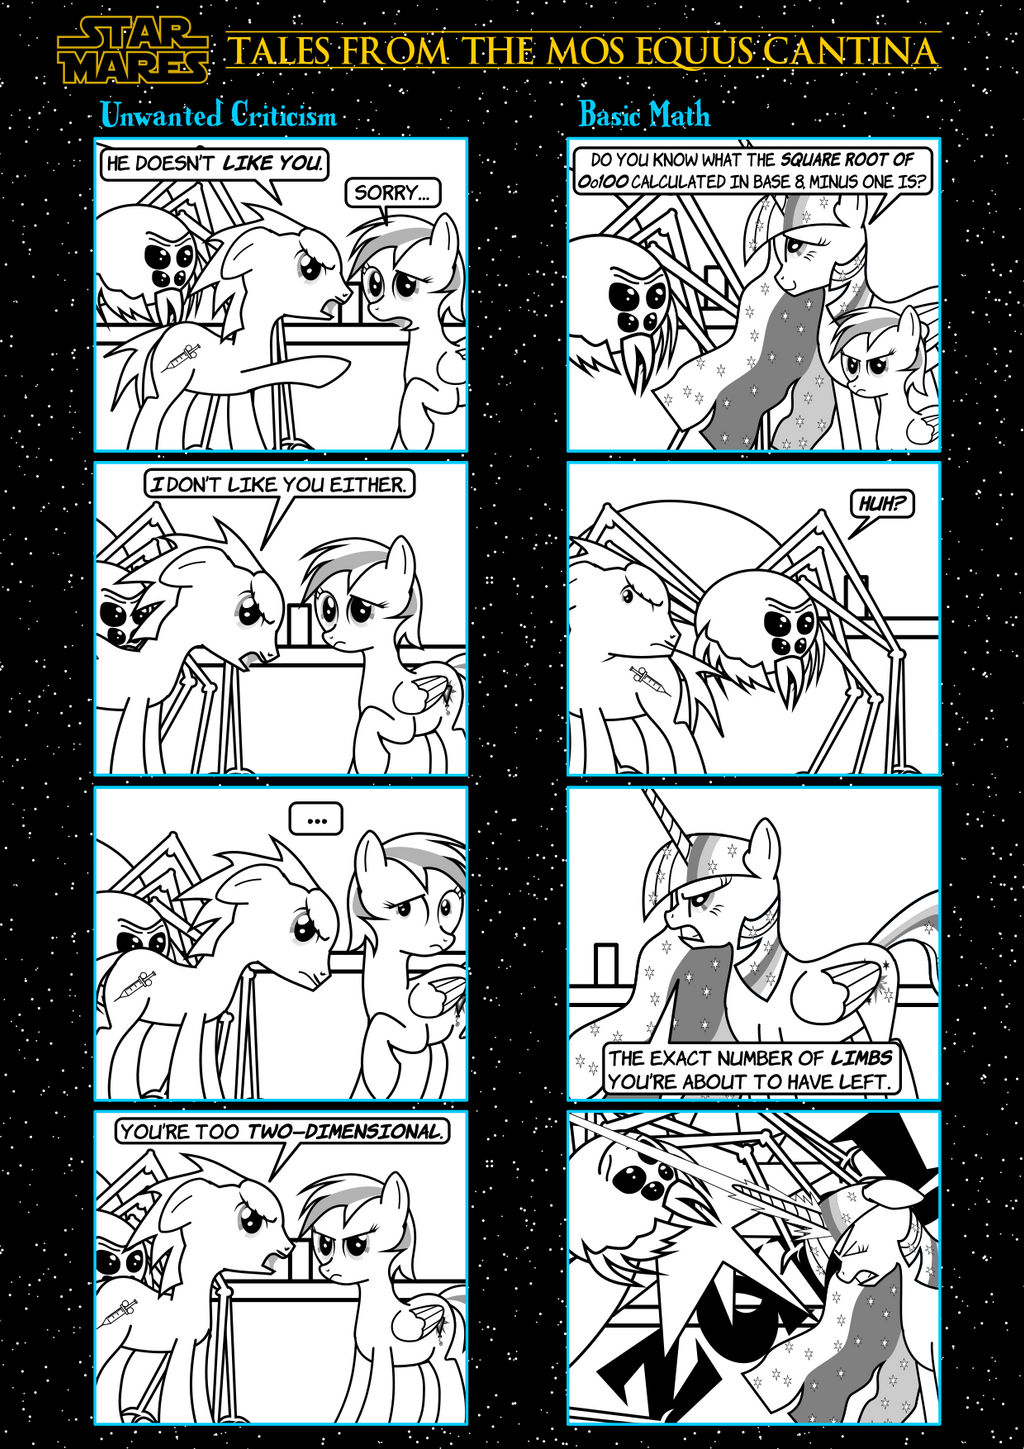 Star Mares - Tales from the Mos Equus Cantina #1